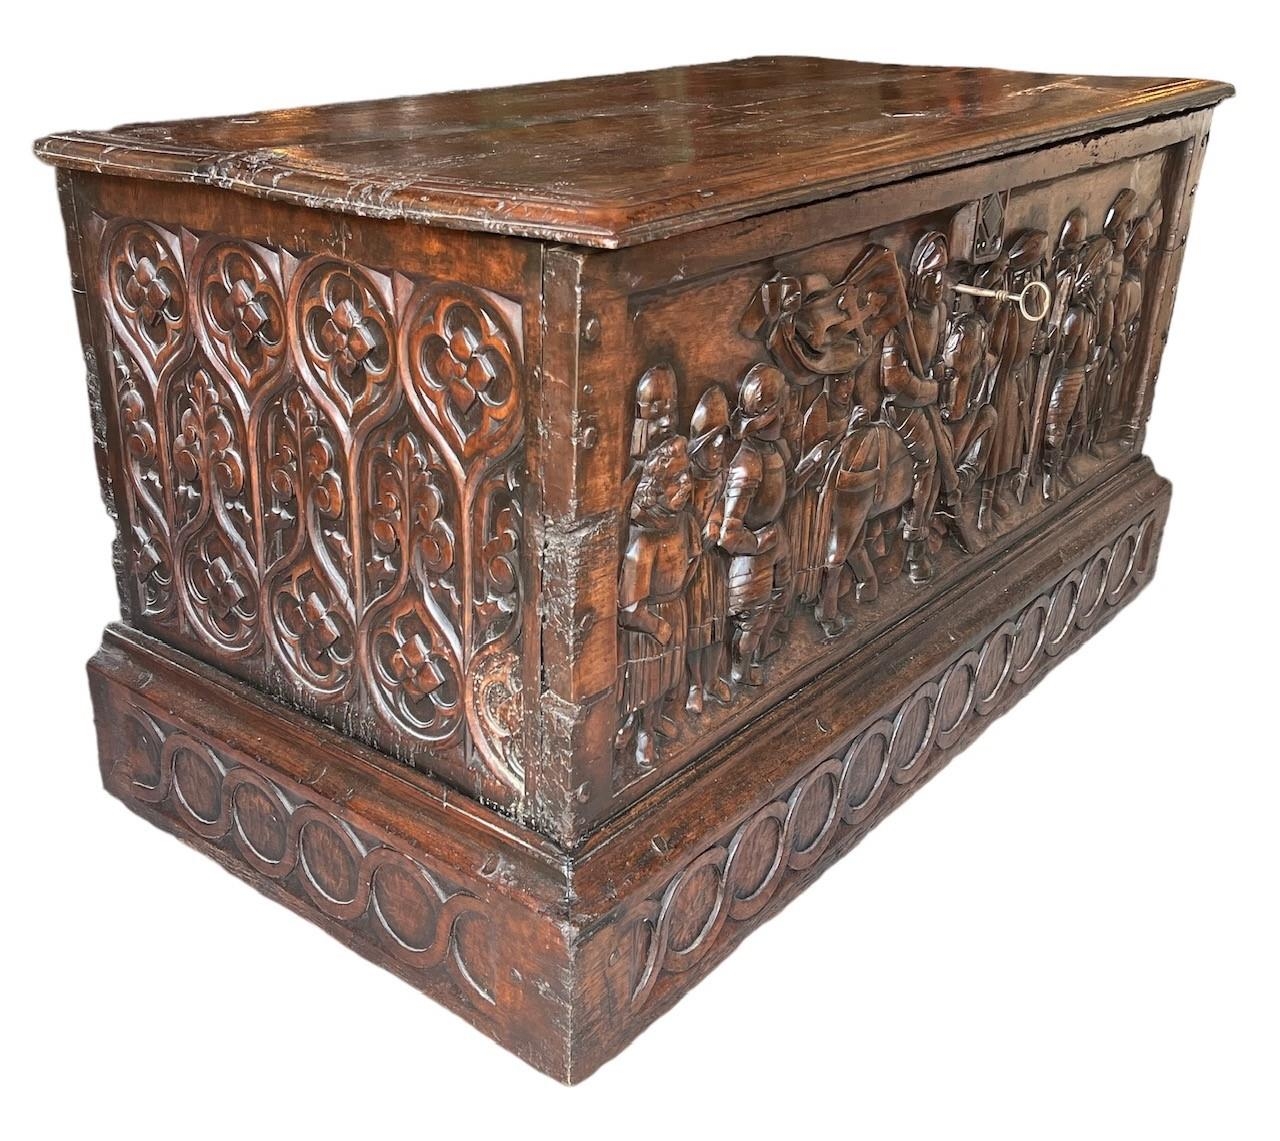 A RARE 15TH CENTURY FRENCH CARVED WALNUT COFFER,With hinge lid above carved panel in relief with a - Image 2 of 4